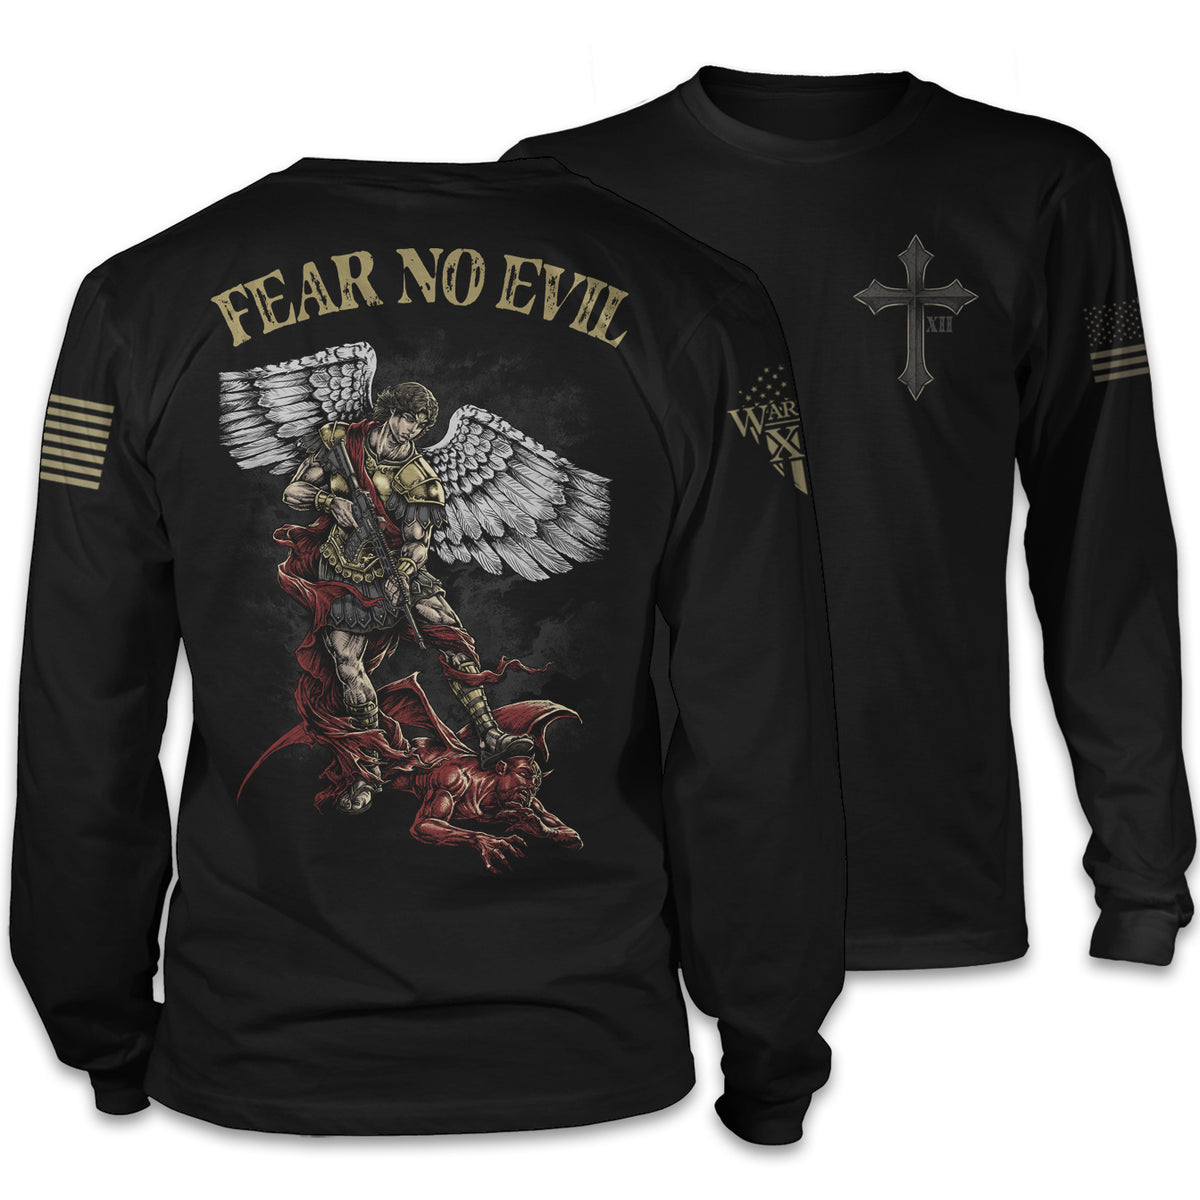 Front & back black long sleeve shirt with the words "fear no evil" with a Saint Michael the Archangel holding a gun with his foot on Satan printed on the shirt.